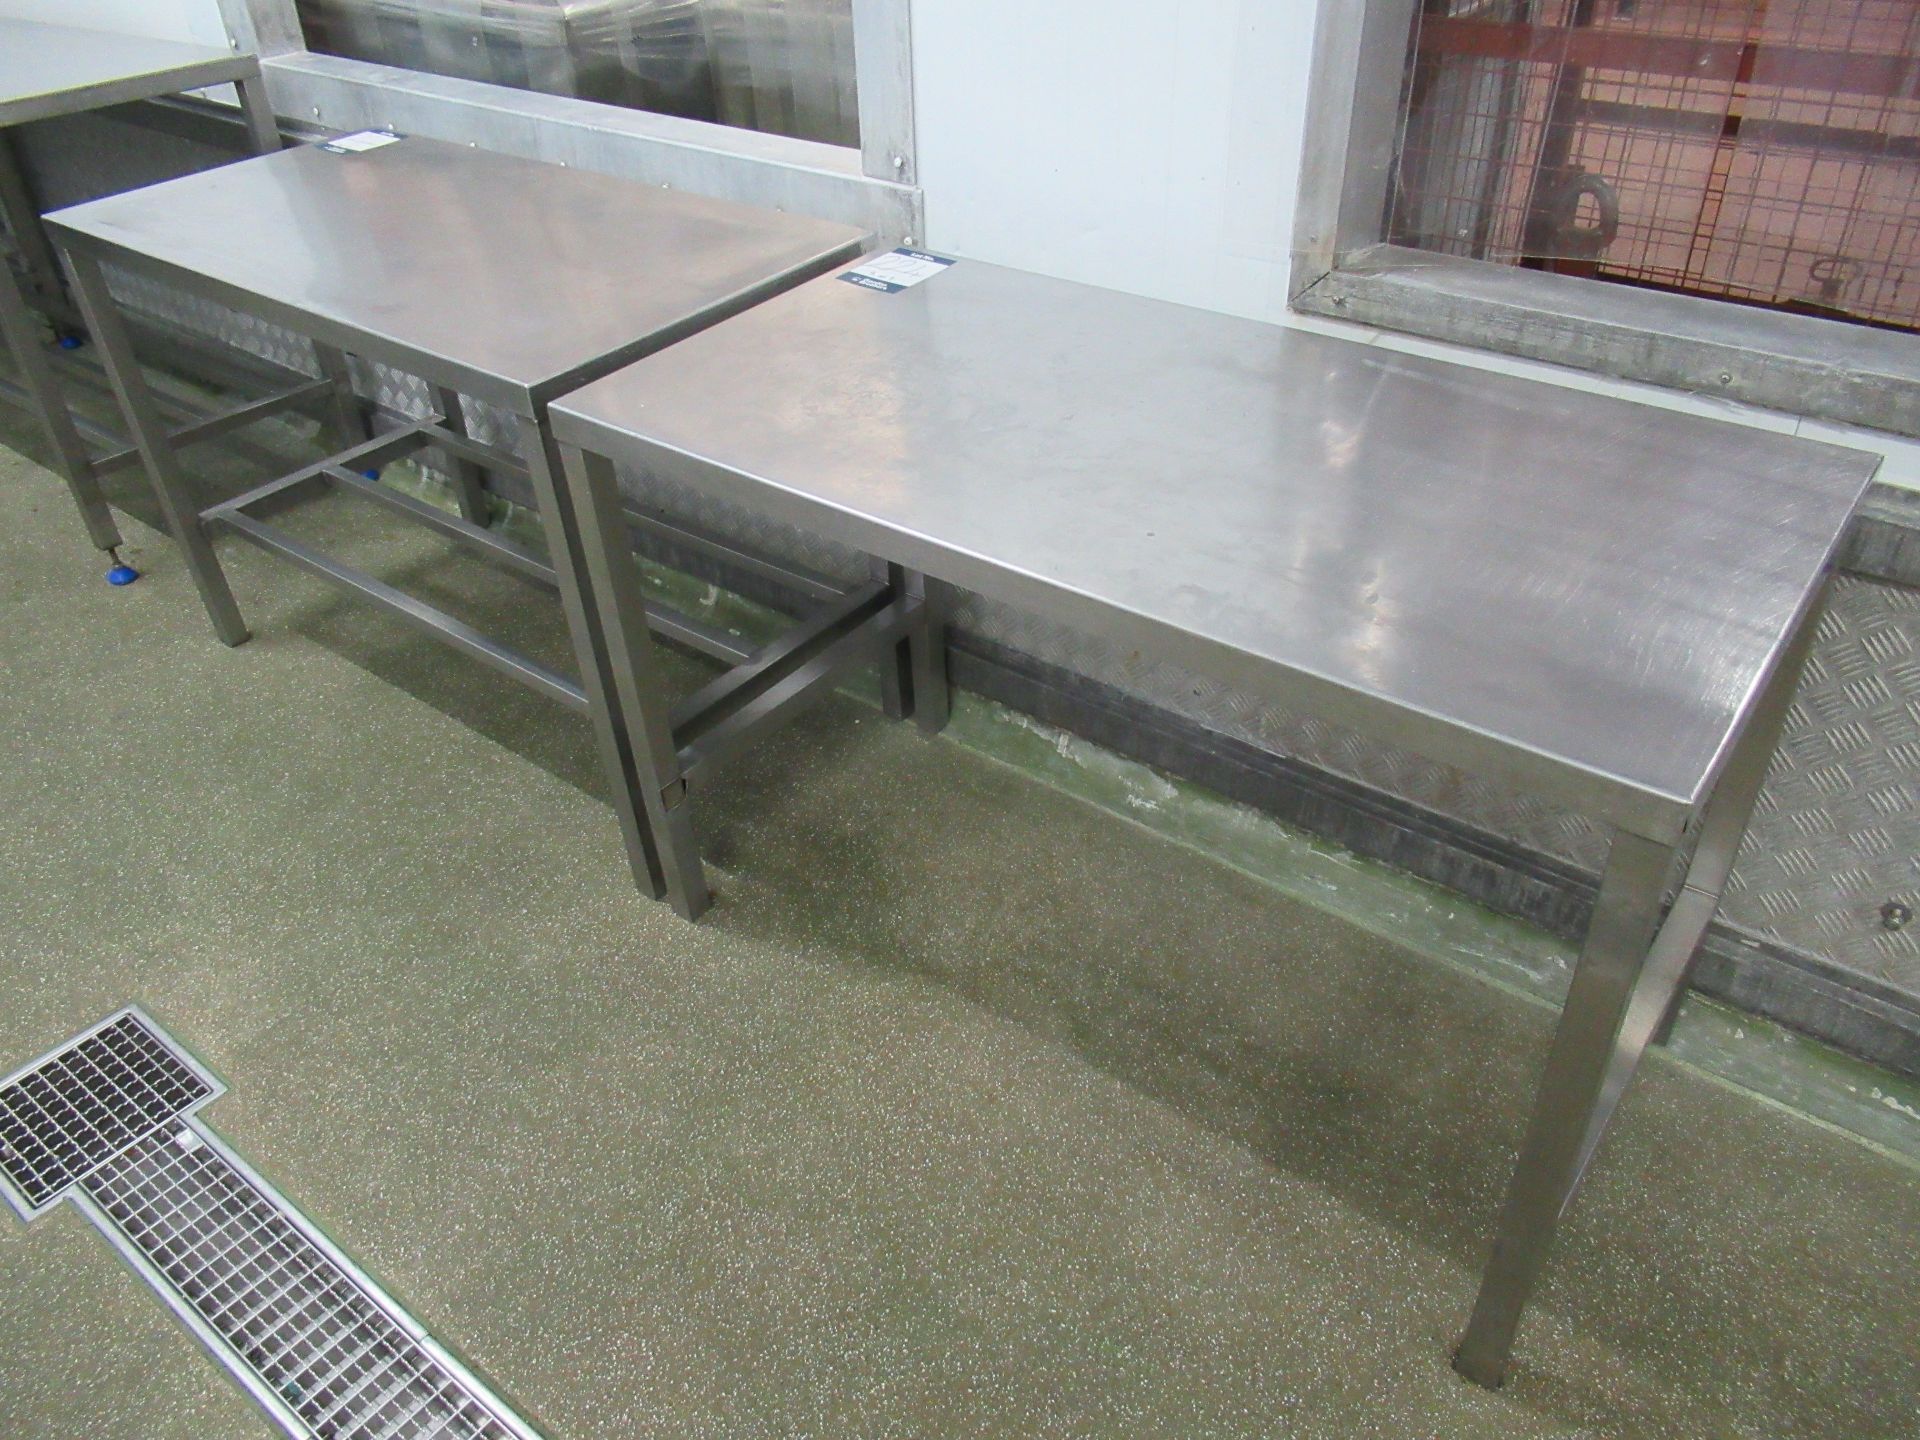 3 Stainless steel tables with 1200 x 600mm work surface